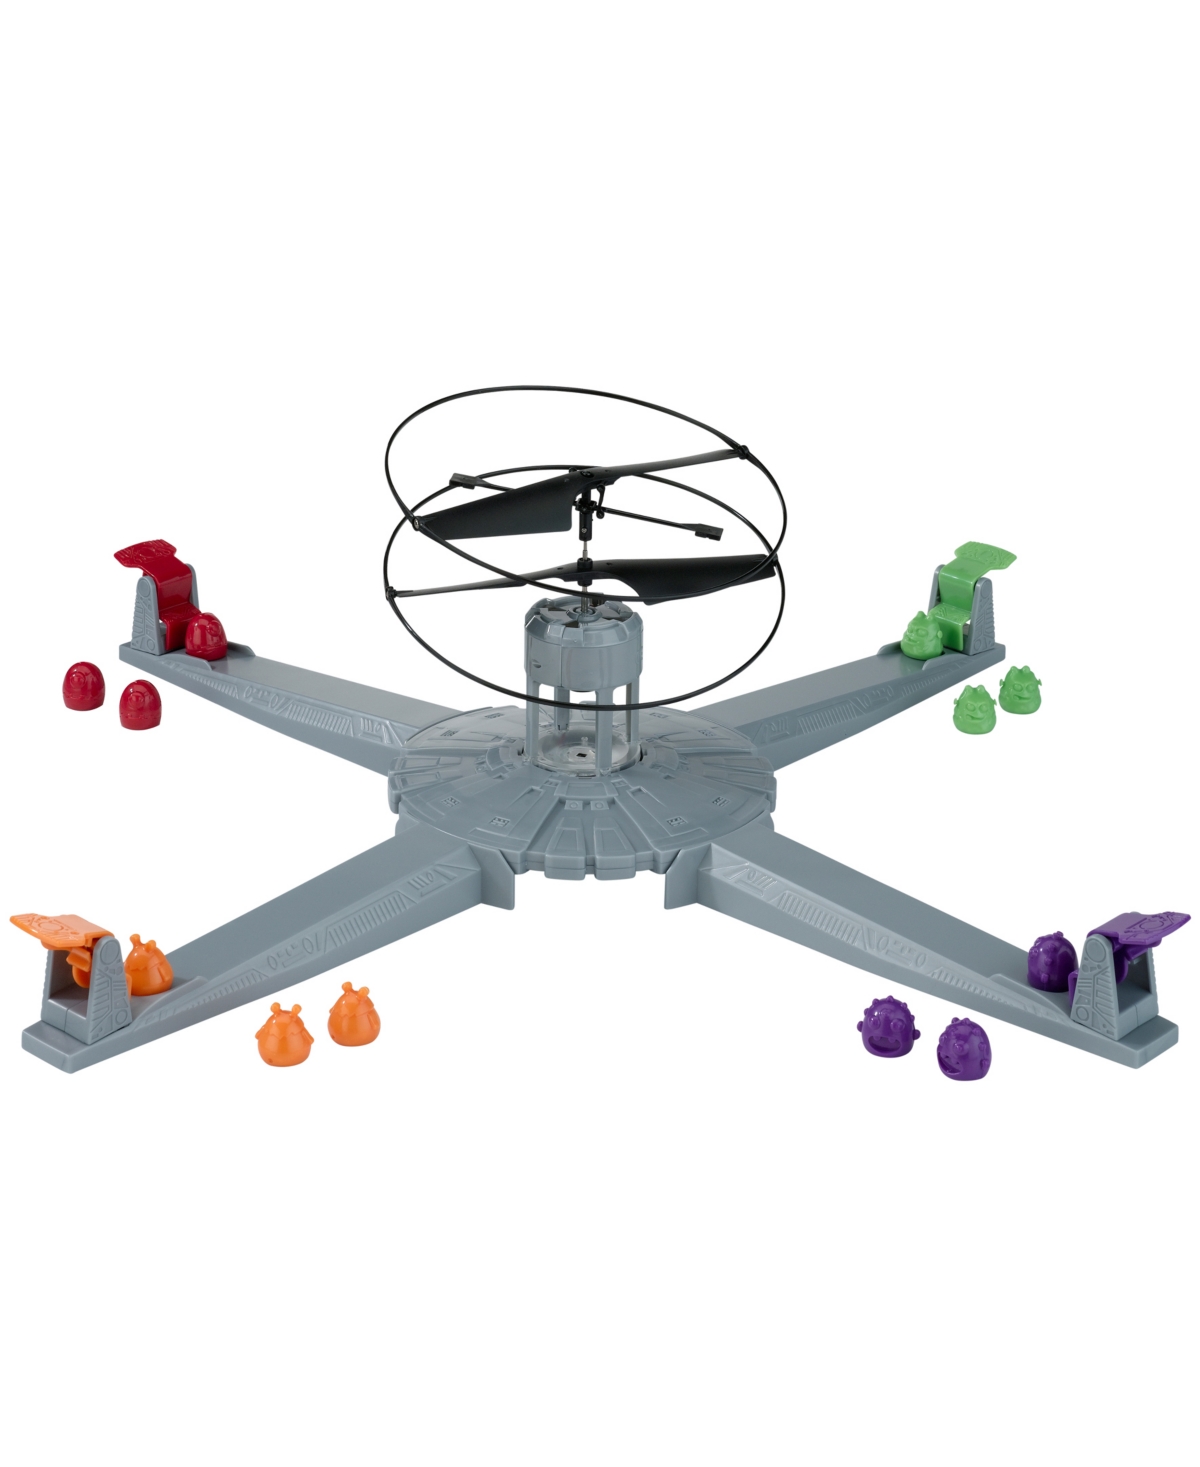 Shop Playmonster Drone Home In No Color